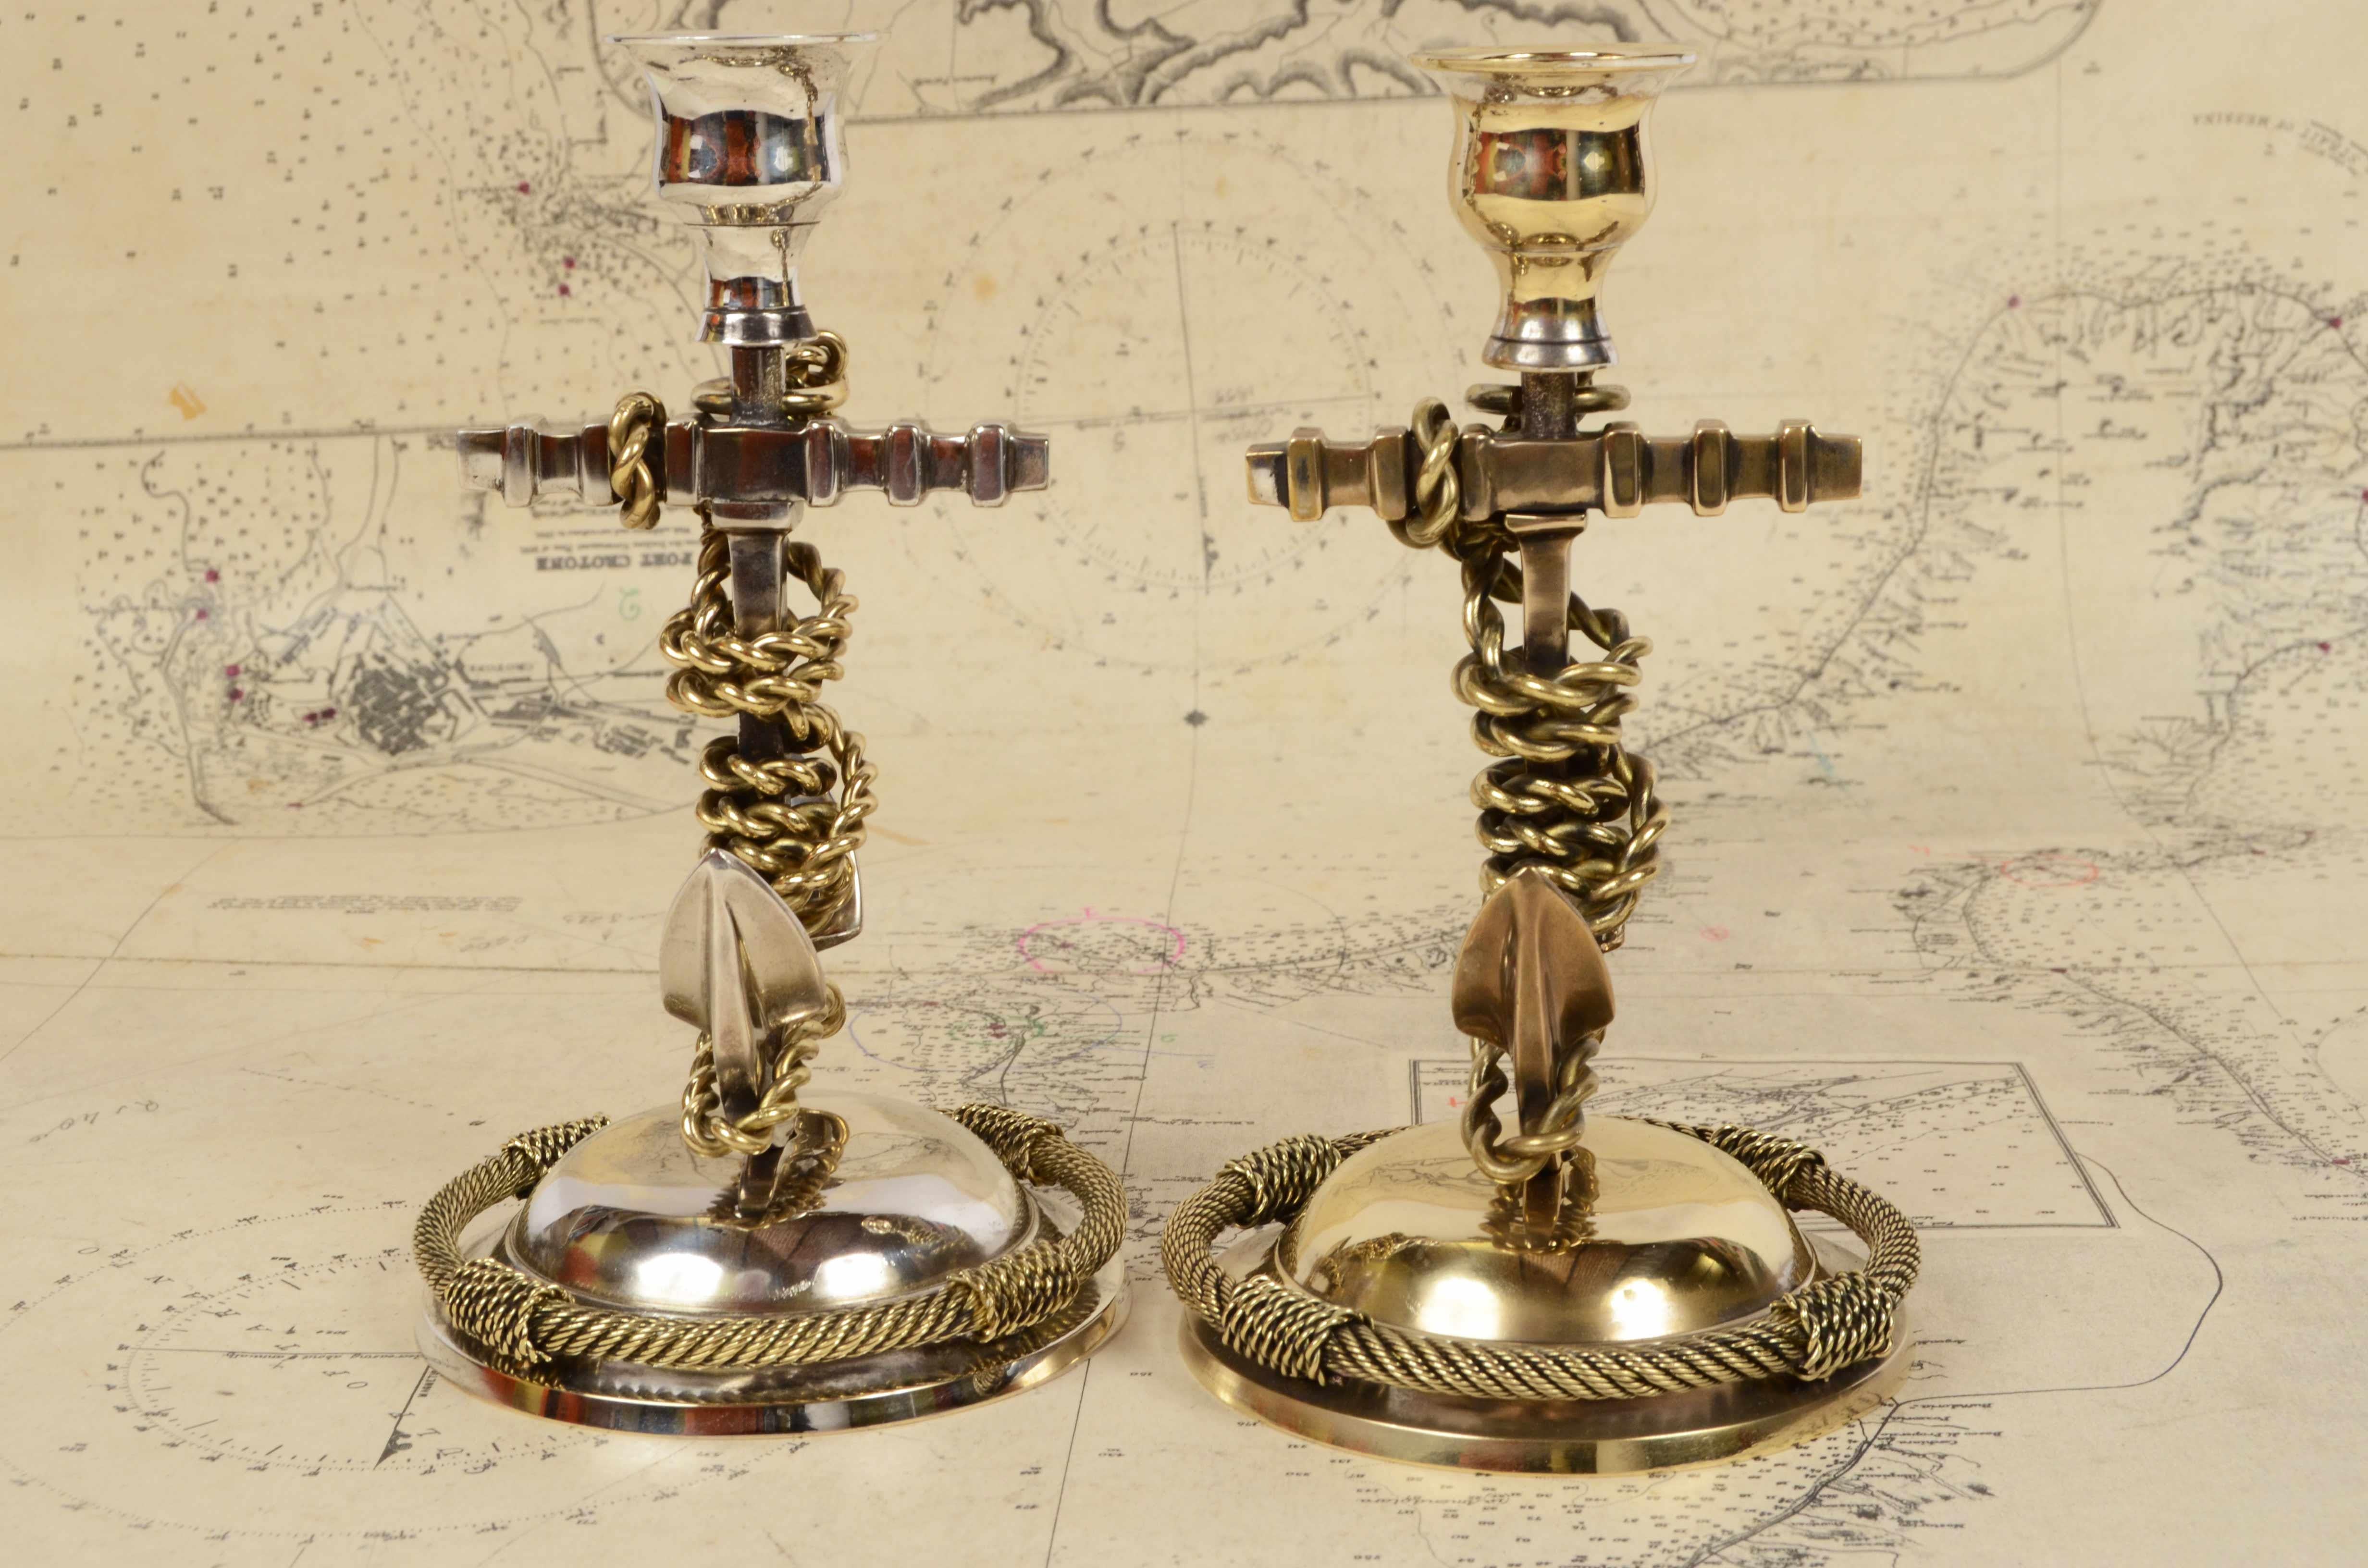 Pair of English nautical candlesticks from the 1920s, lost wax casting in silvered bronze. Made in 3 pieces: a base surrounded by a rope and to which the anchor is screwed wrapped along its entire length by a twisted rope that reaches up to the